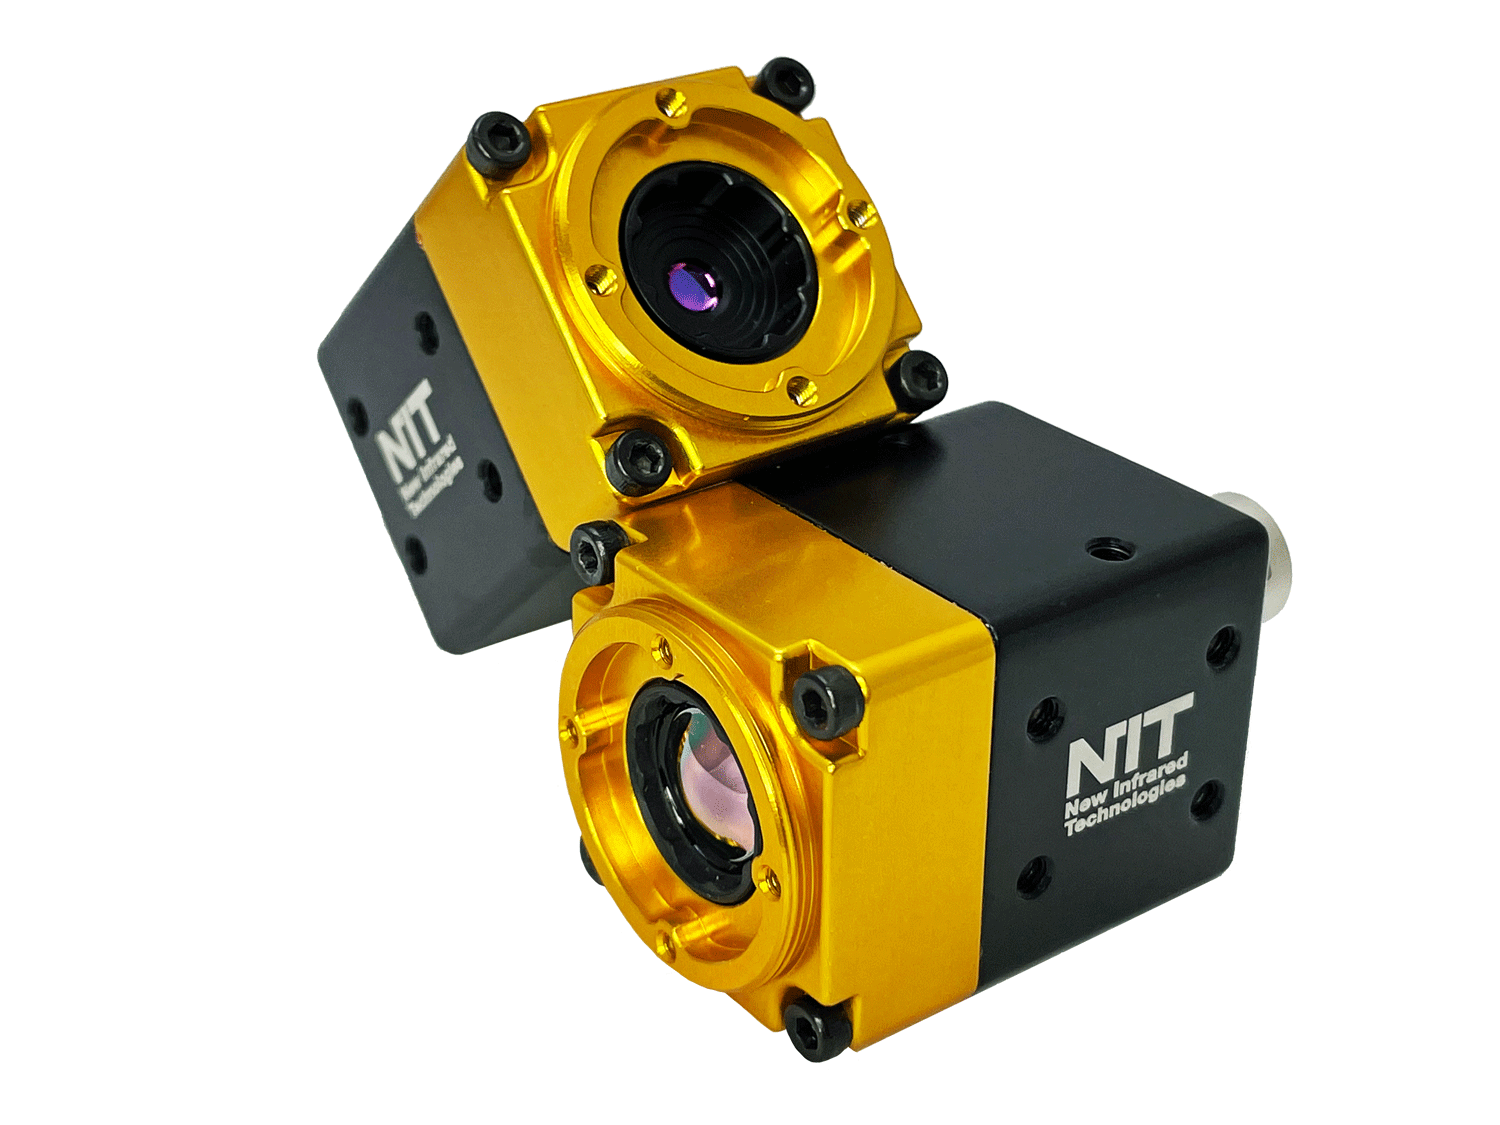 New LIR320 Thermal Camera from New Infrared Technologies (NIT)